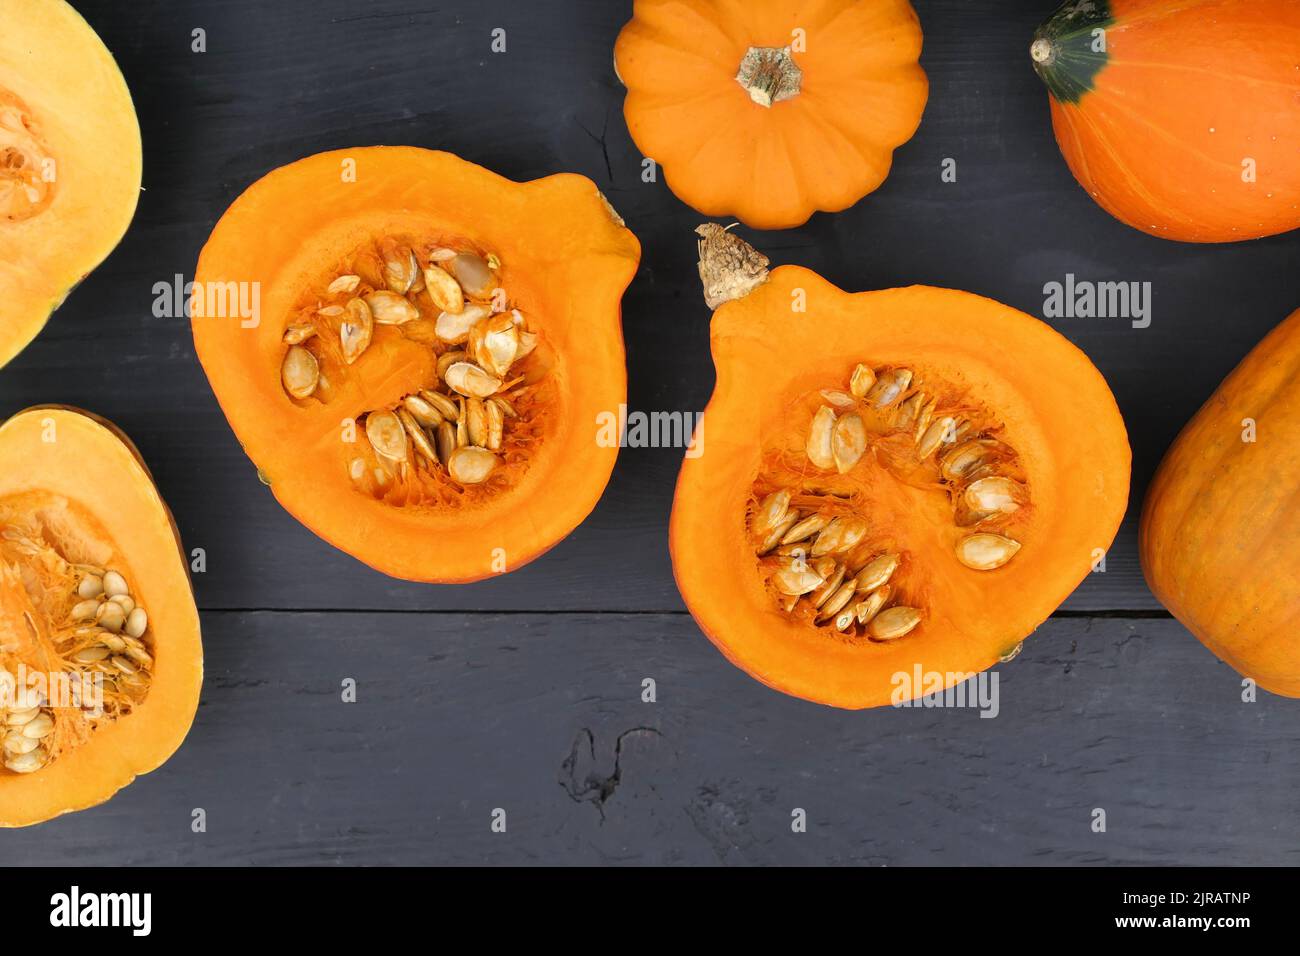 Cut pumpkins on black background. Top view. Pumpkin pulp and seeds food. Stock Photo